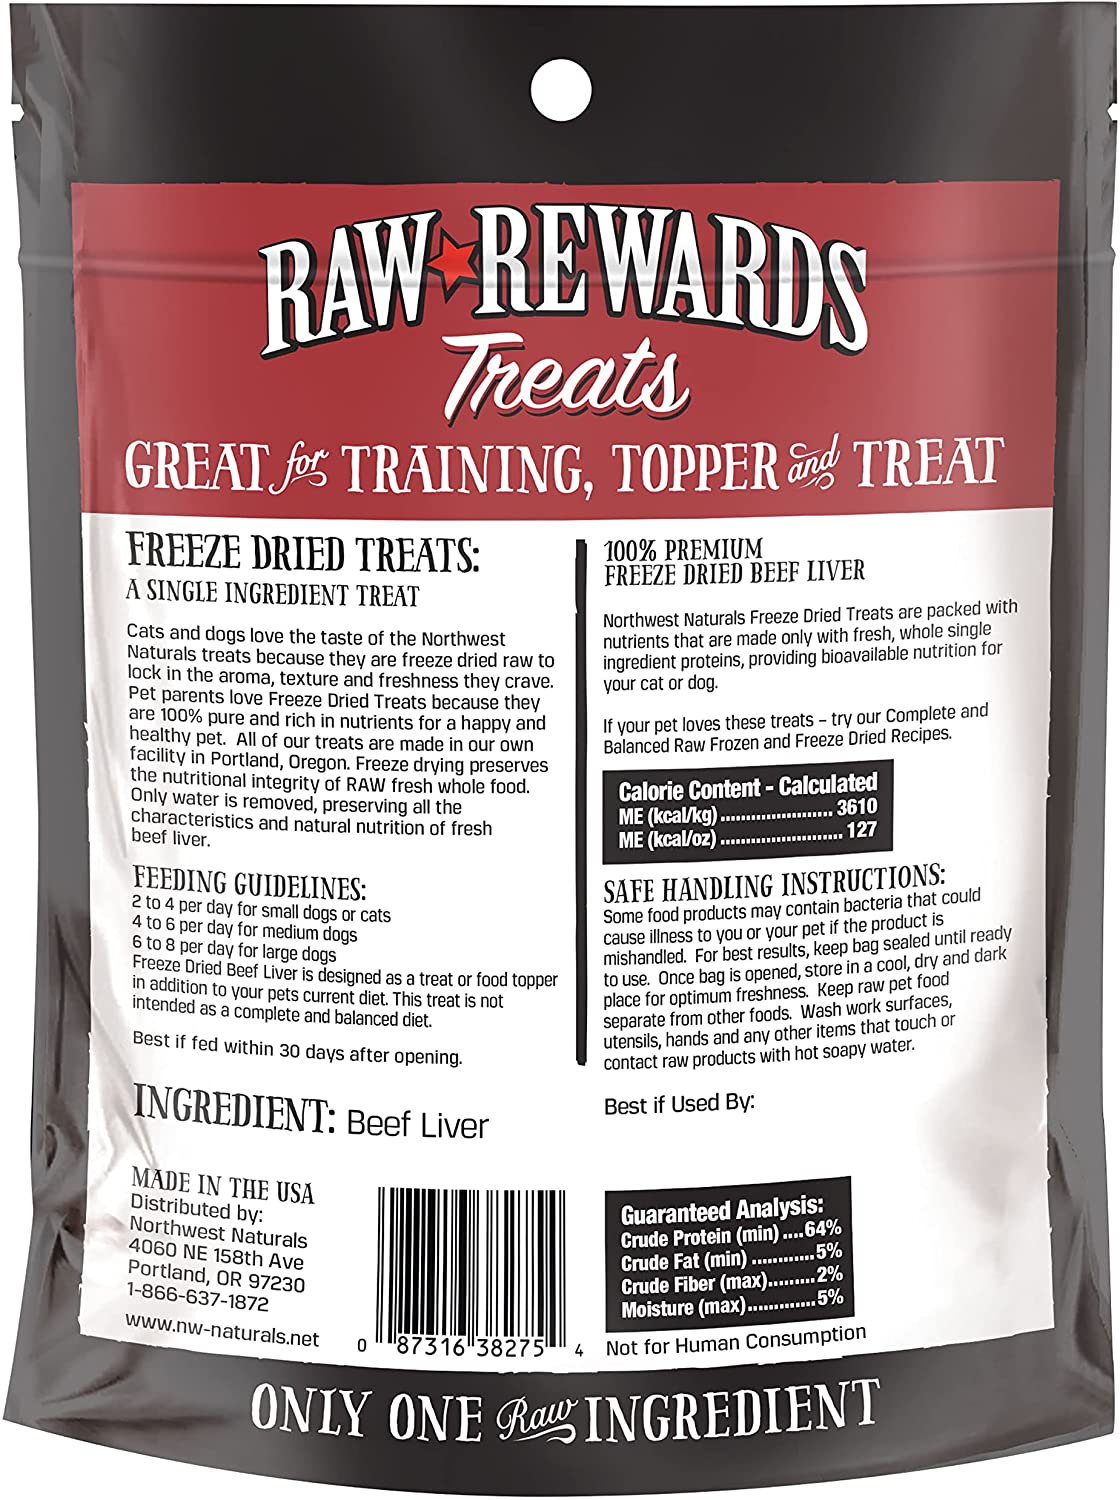 Raw Rewards Freeze Dried Beef Liver Treats for Dogs & Cats